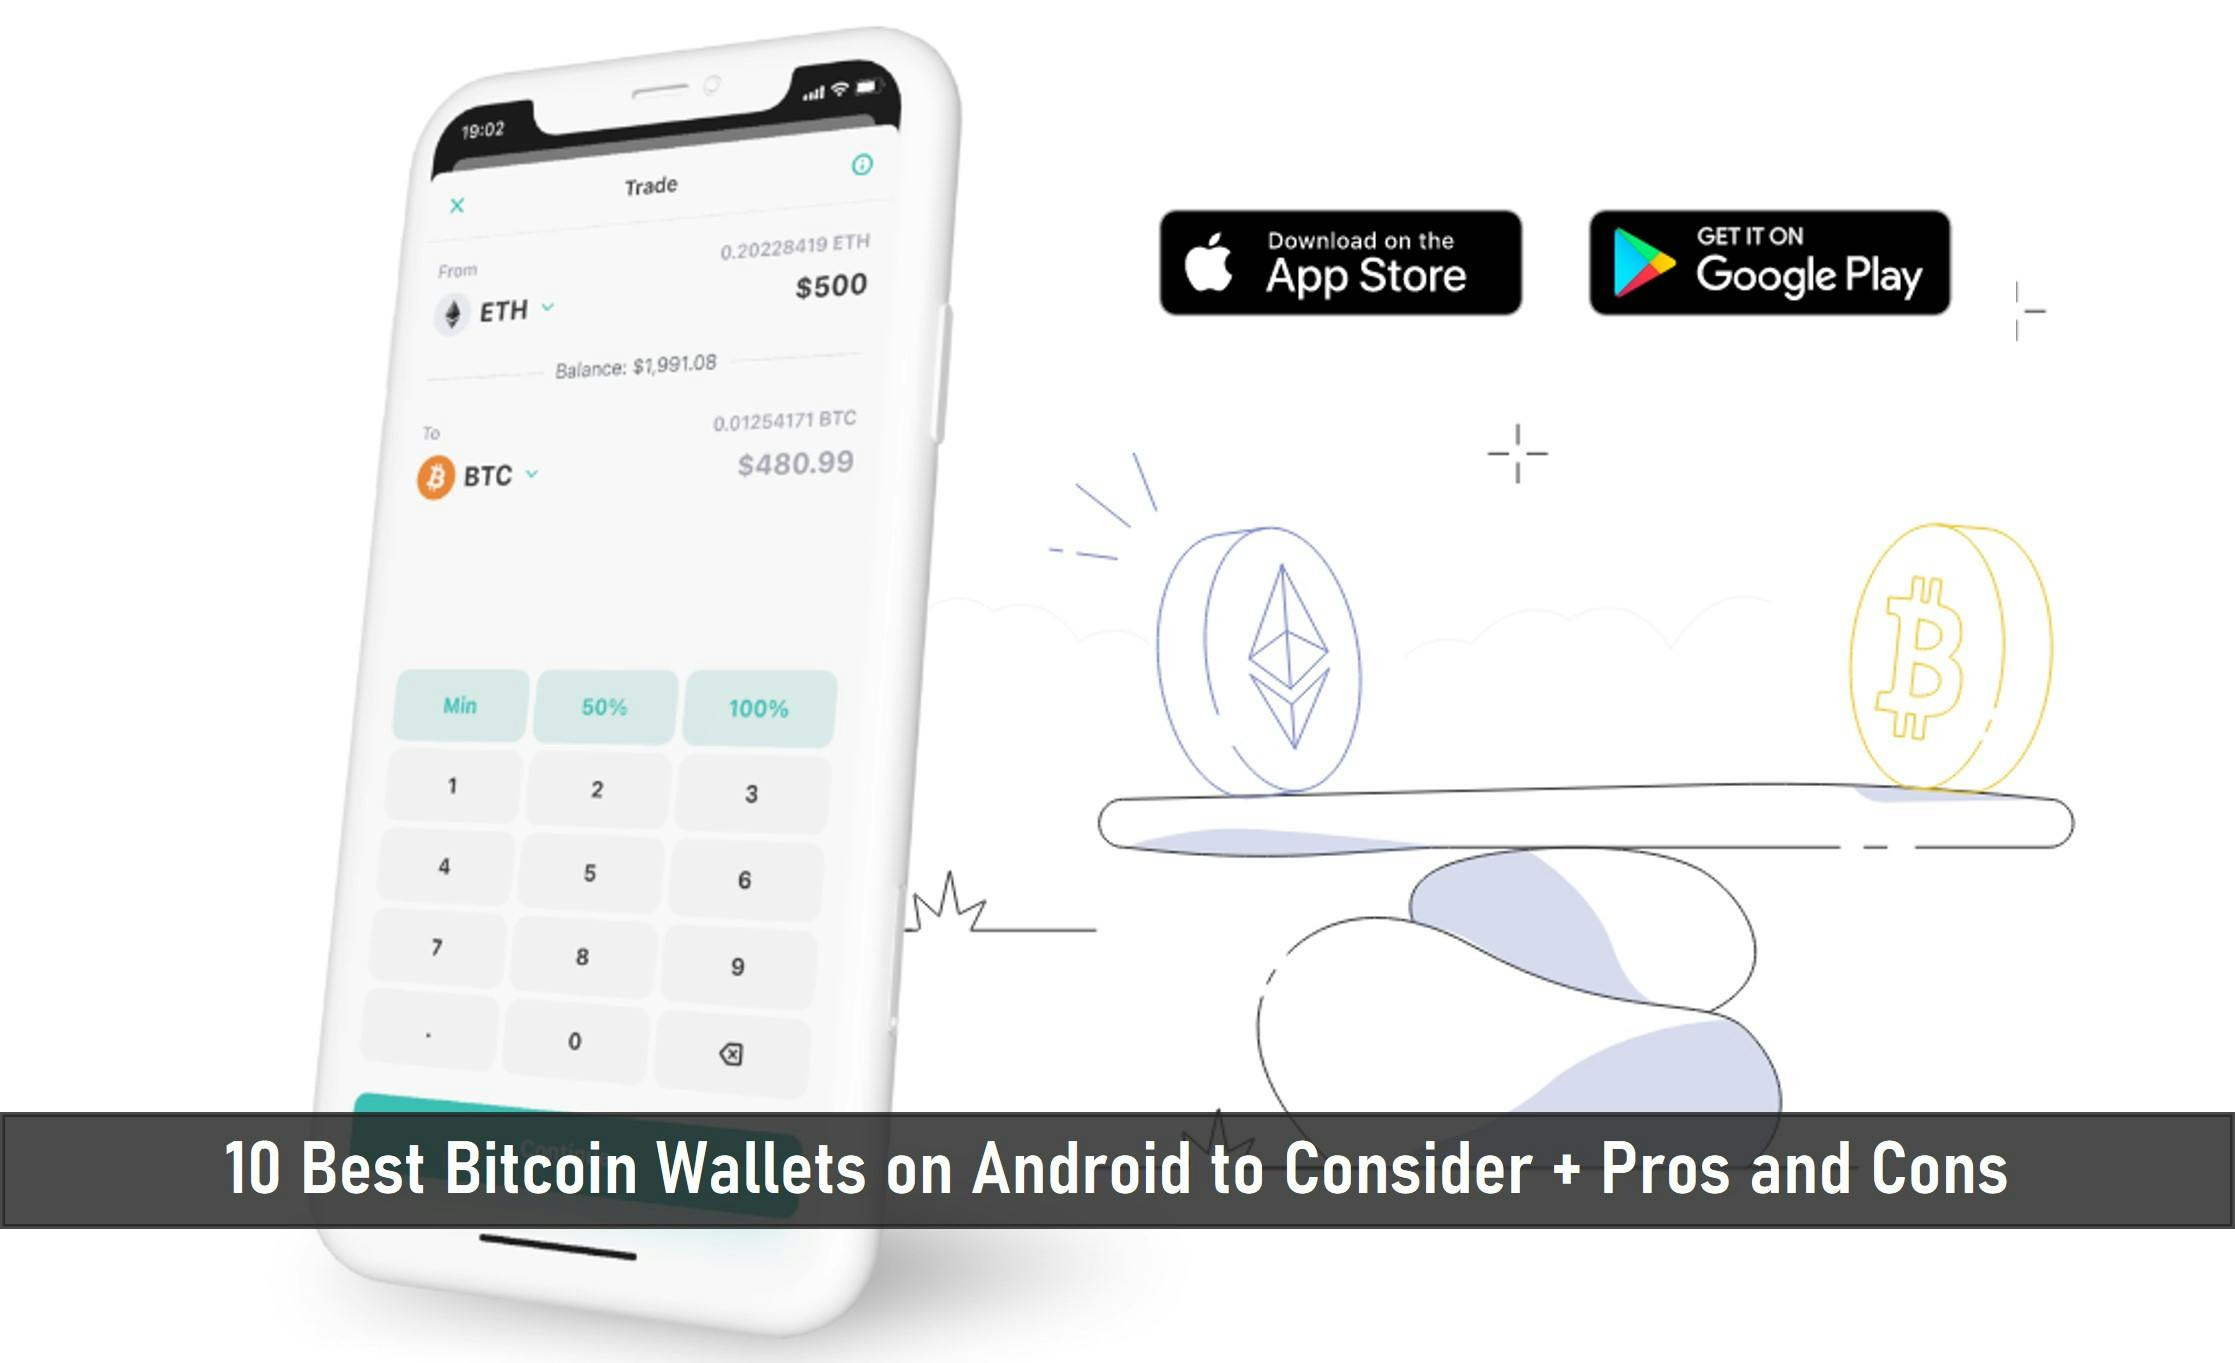 10 Best Bitcoin Wallets on Android to Consider + Pros and Cons